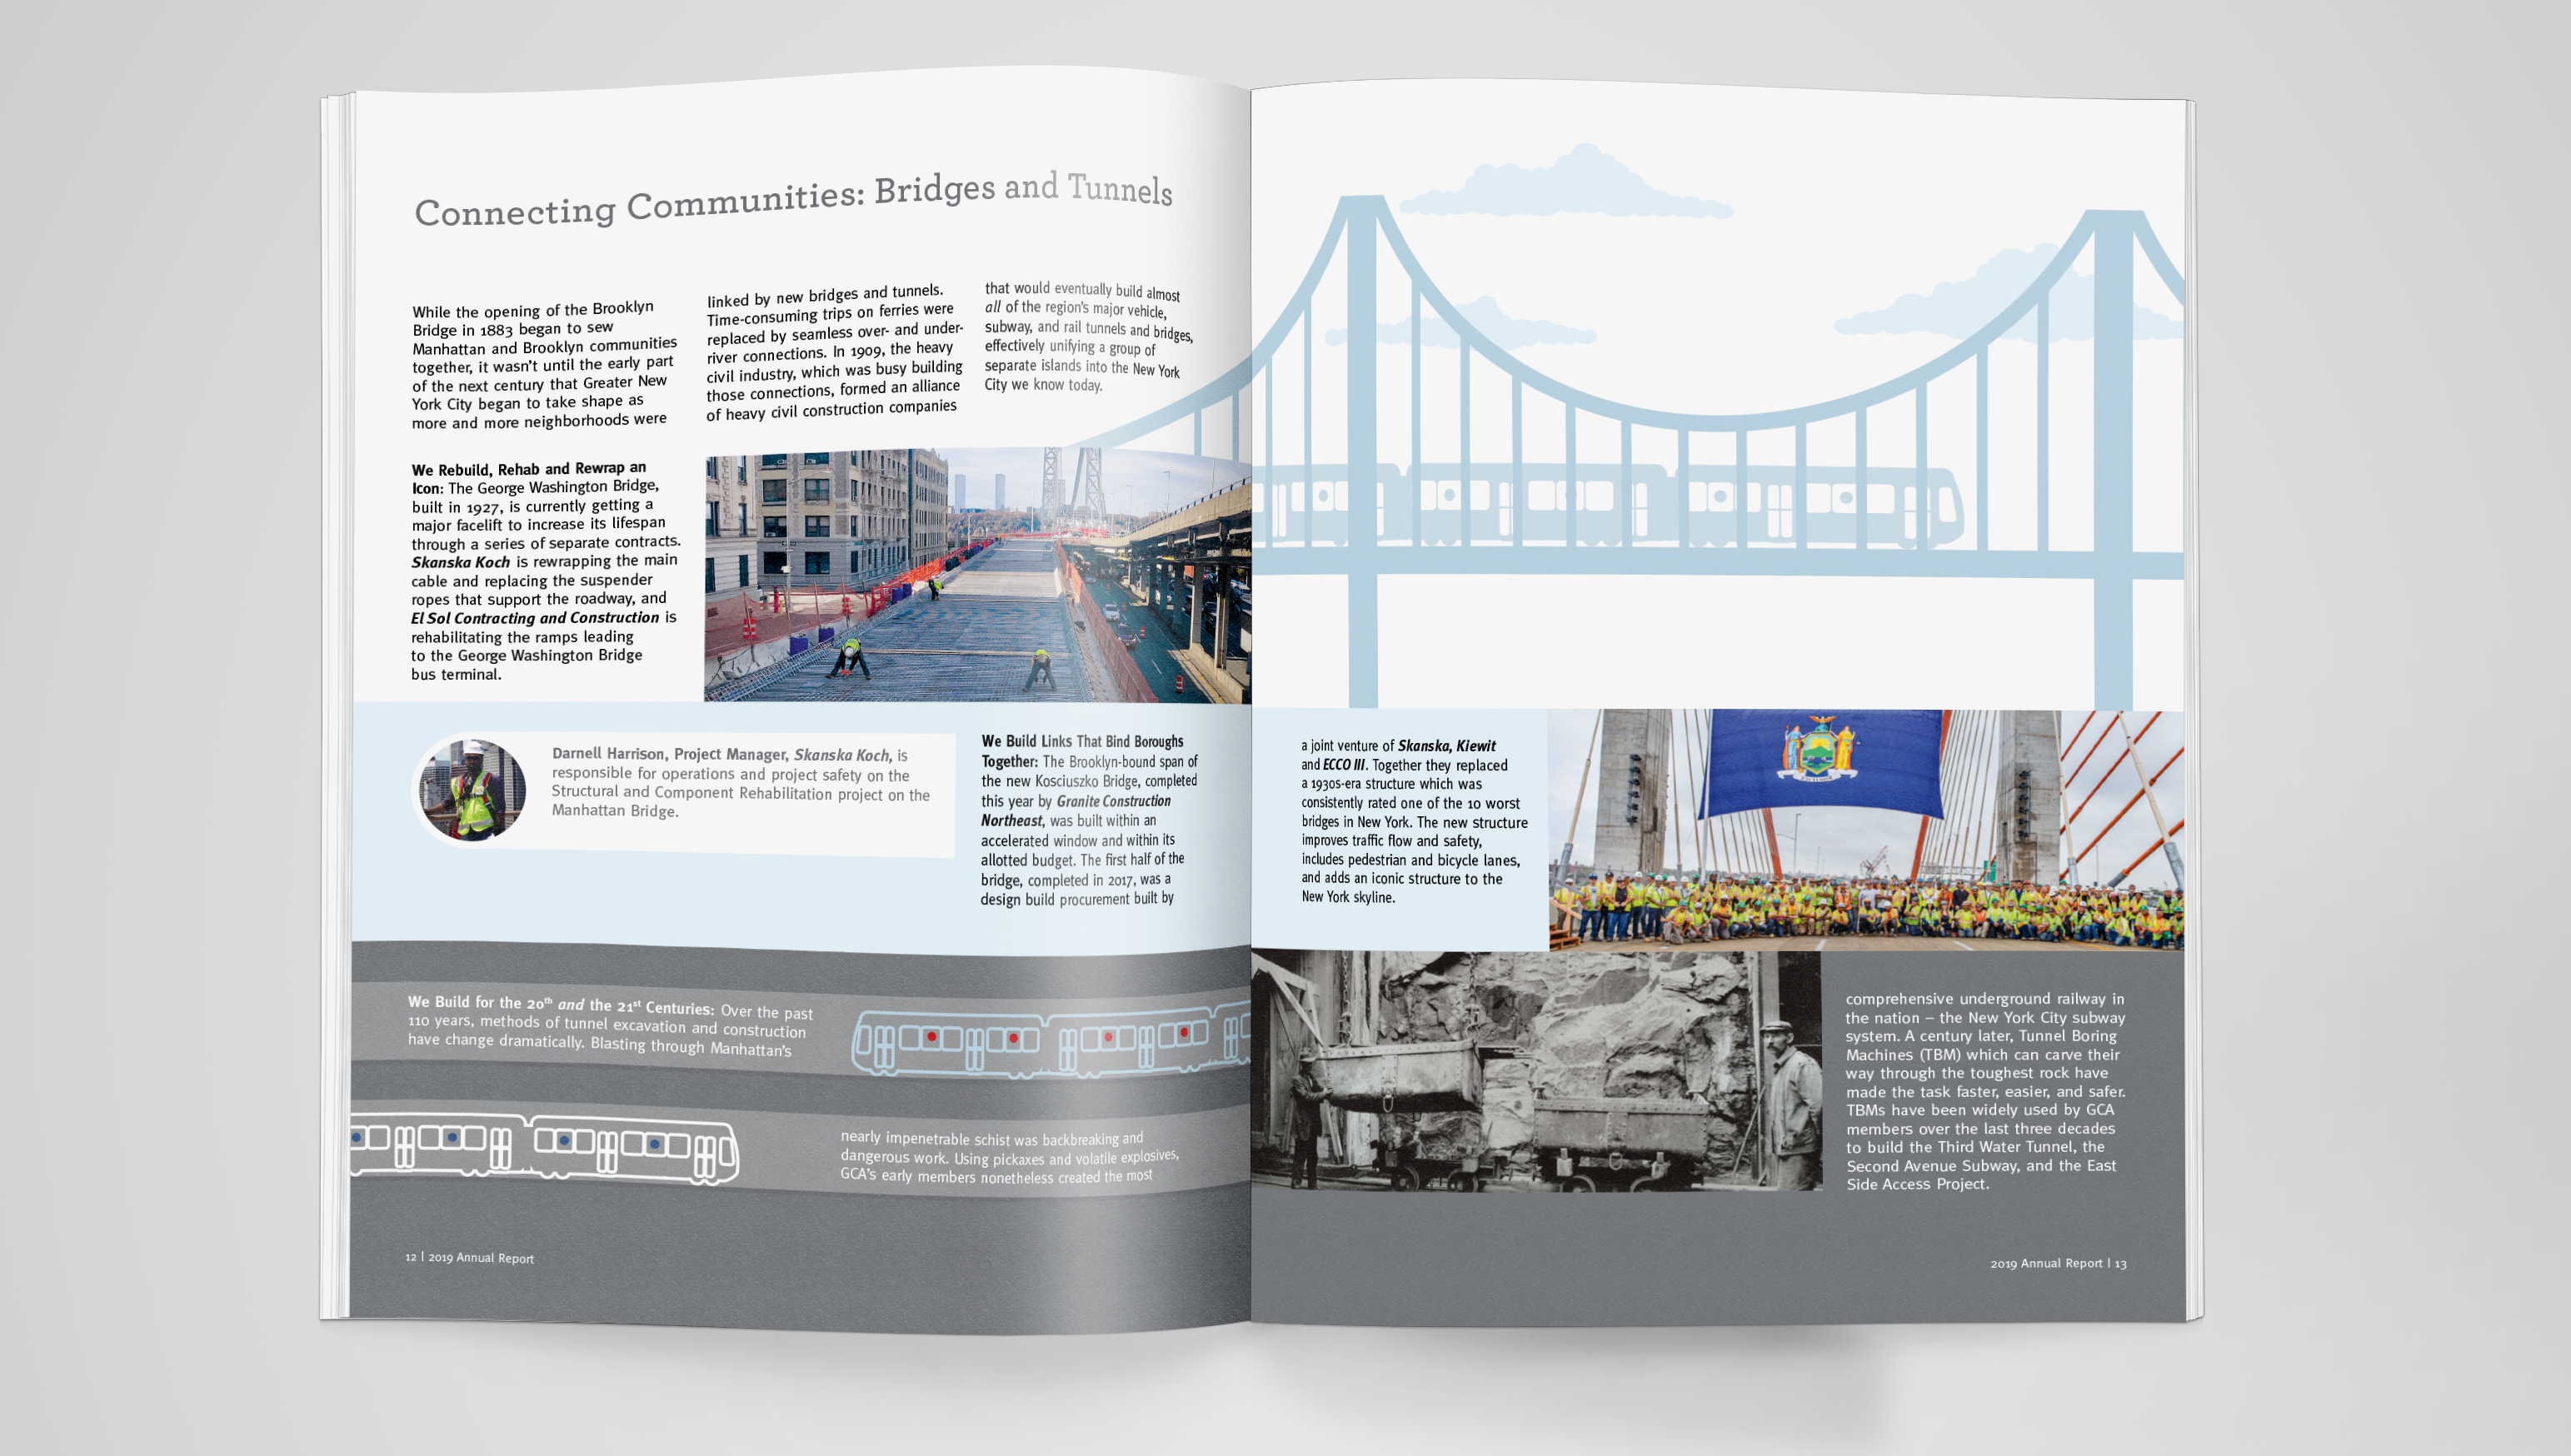 Drawings of subways and bridges with photos of building projects to illustrate a case study